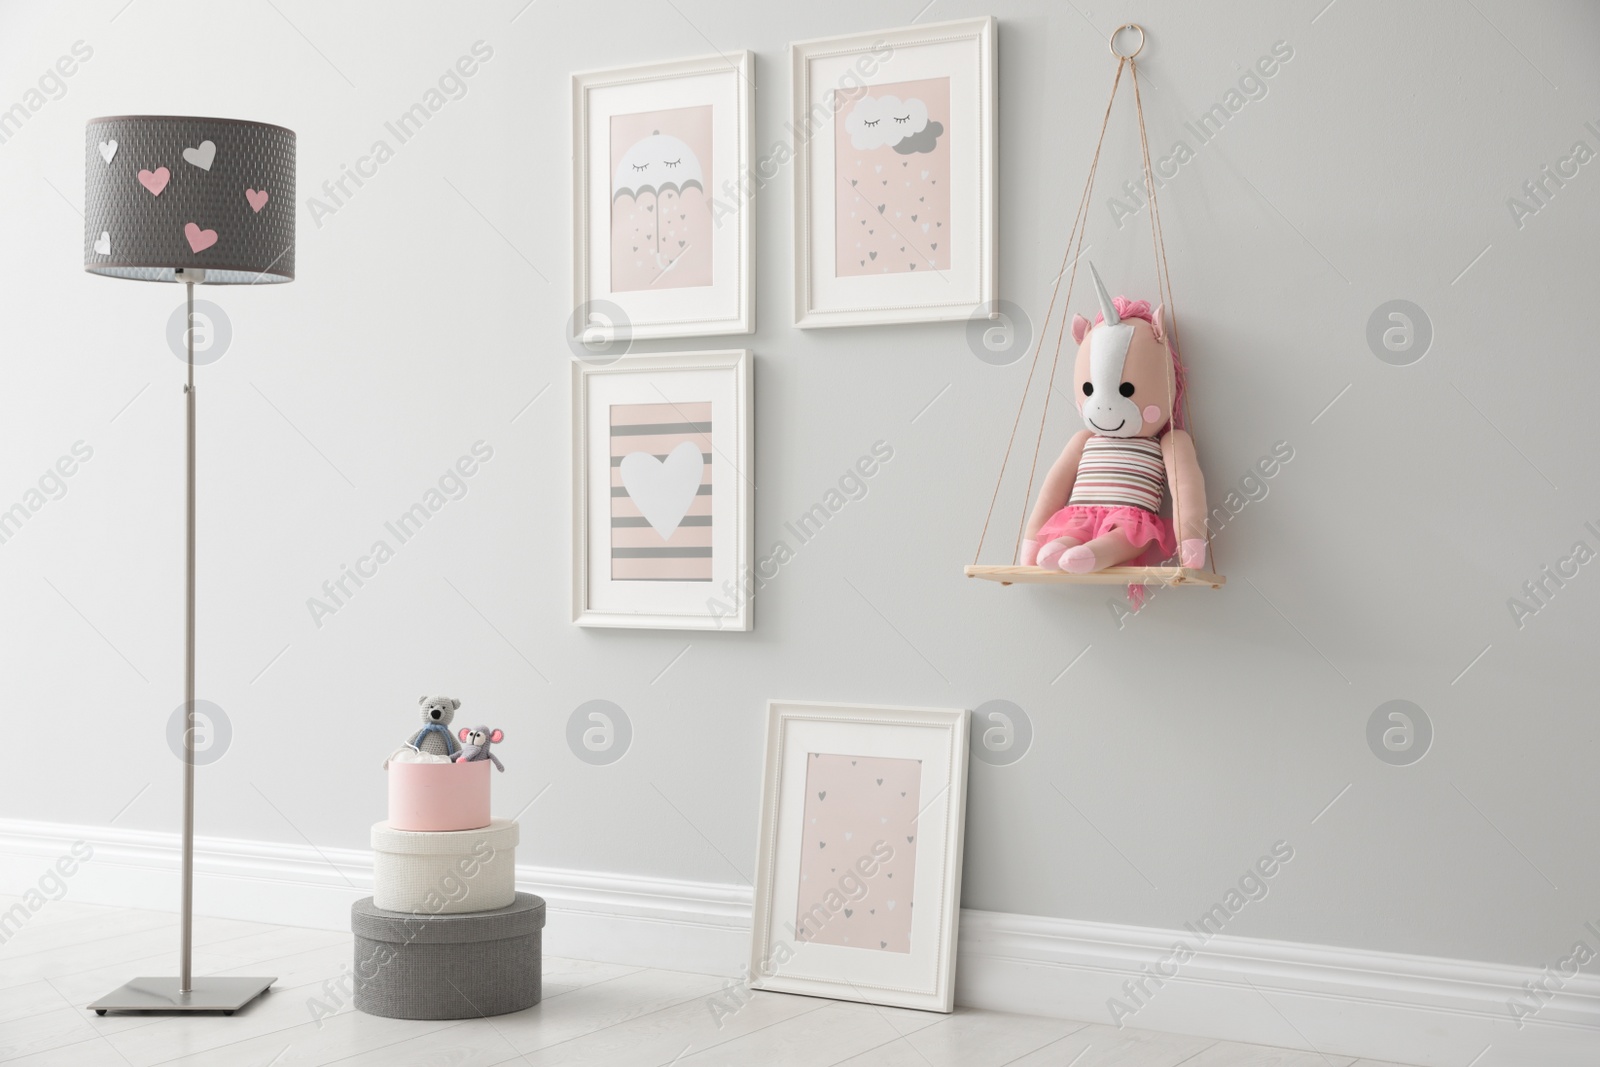 Photo of Children's room interior with floor lamp and cute pictures on wall